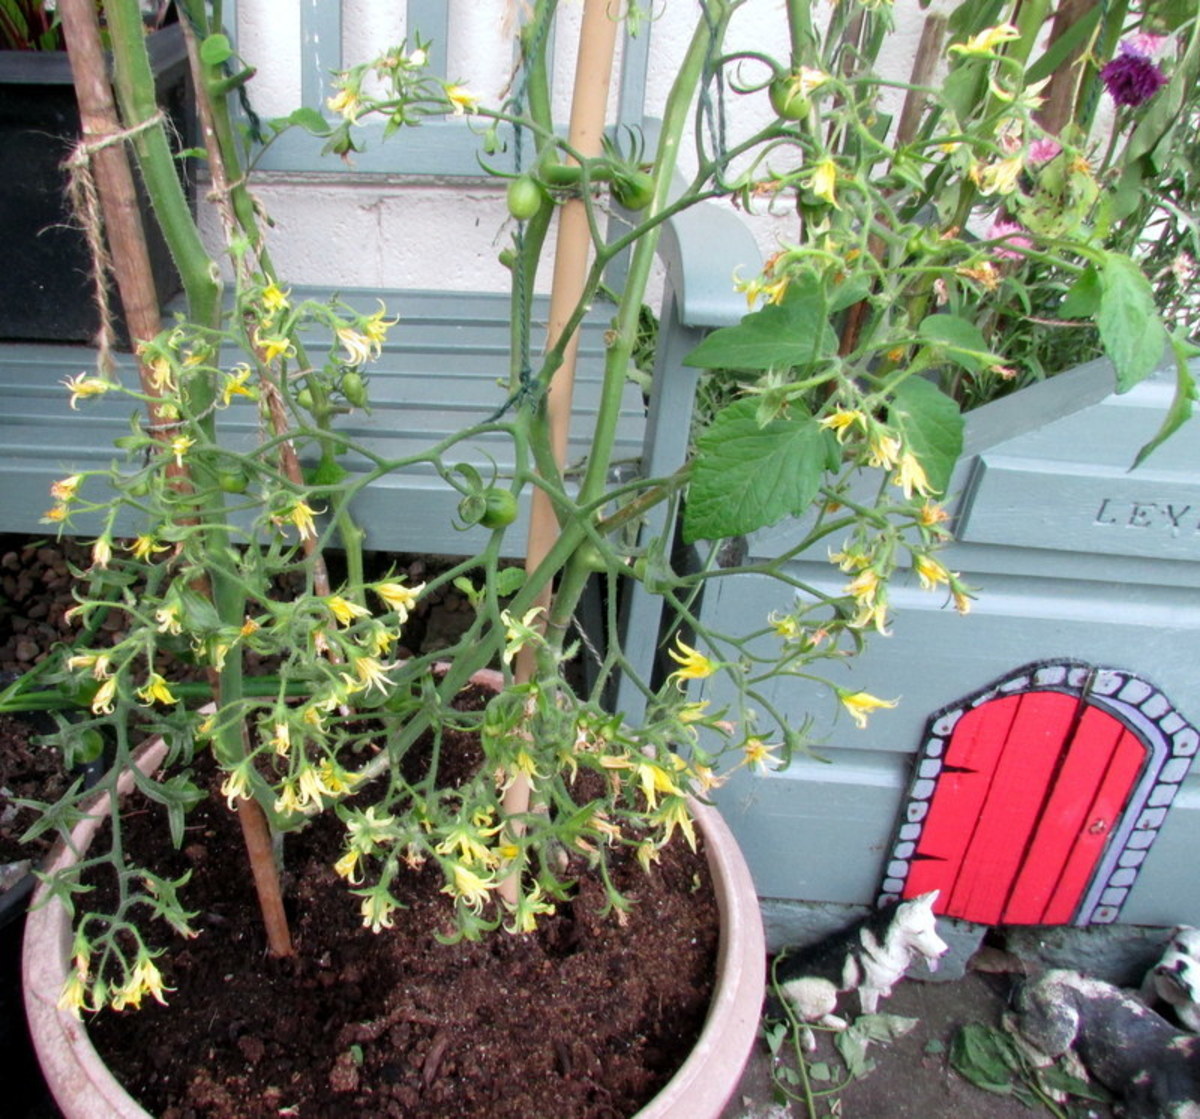 Tomato plants attached to stakes